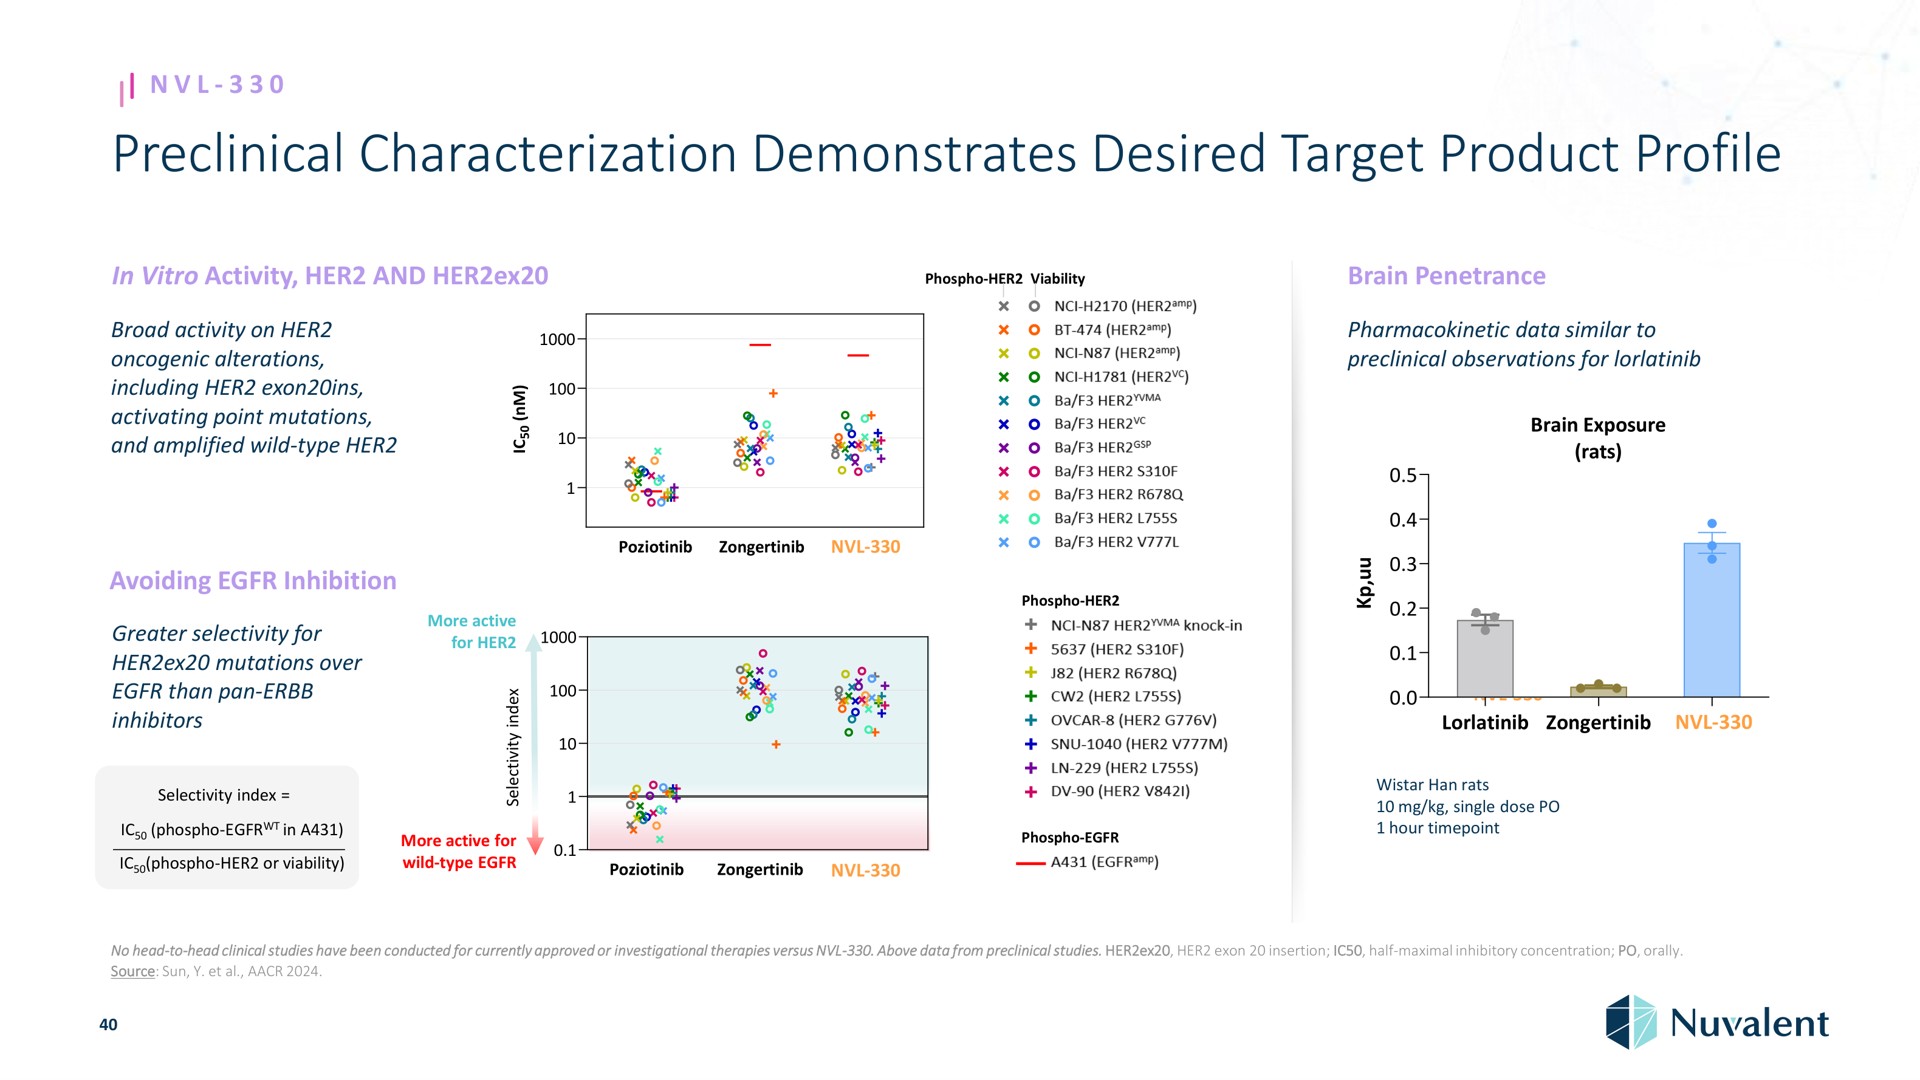 preclinical characterization demonstrates desired target product profile broad activity on her alterations including her exon ins activating point mutations and amplified wild type her i greater selectivity for her mutations over than pan inhibitors selectivity index more active for her a phospho in a phospho her or viability wild type phospho her viability her her her her her her her her her her her phospho her her knock in her her her her her her her phospho a data similar to observations for brain exposure rats han rats single dose hour no head to head clinical studies have been conducted for currently approved or investigational therapies versus above data from studies her her exon insertion half maximal inhibitory concentration orally source sun | Nuvalent